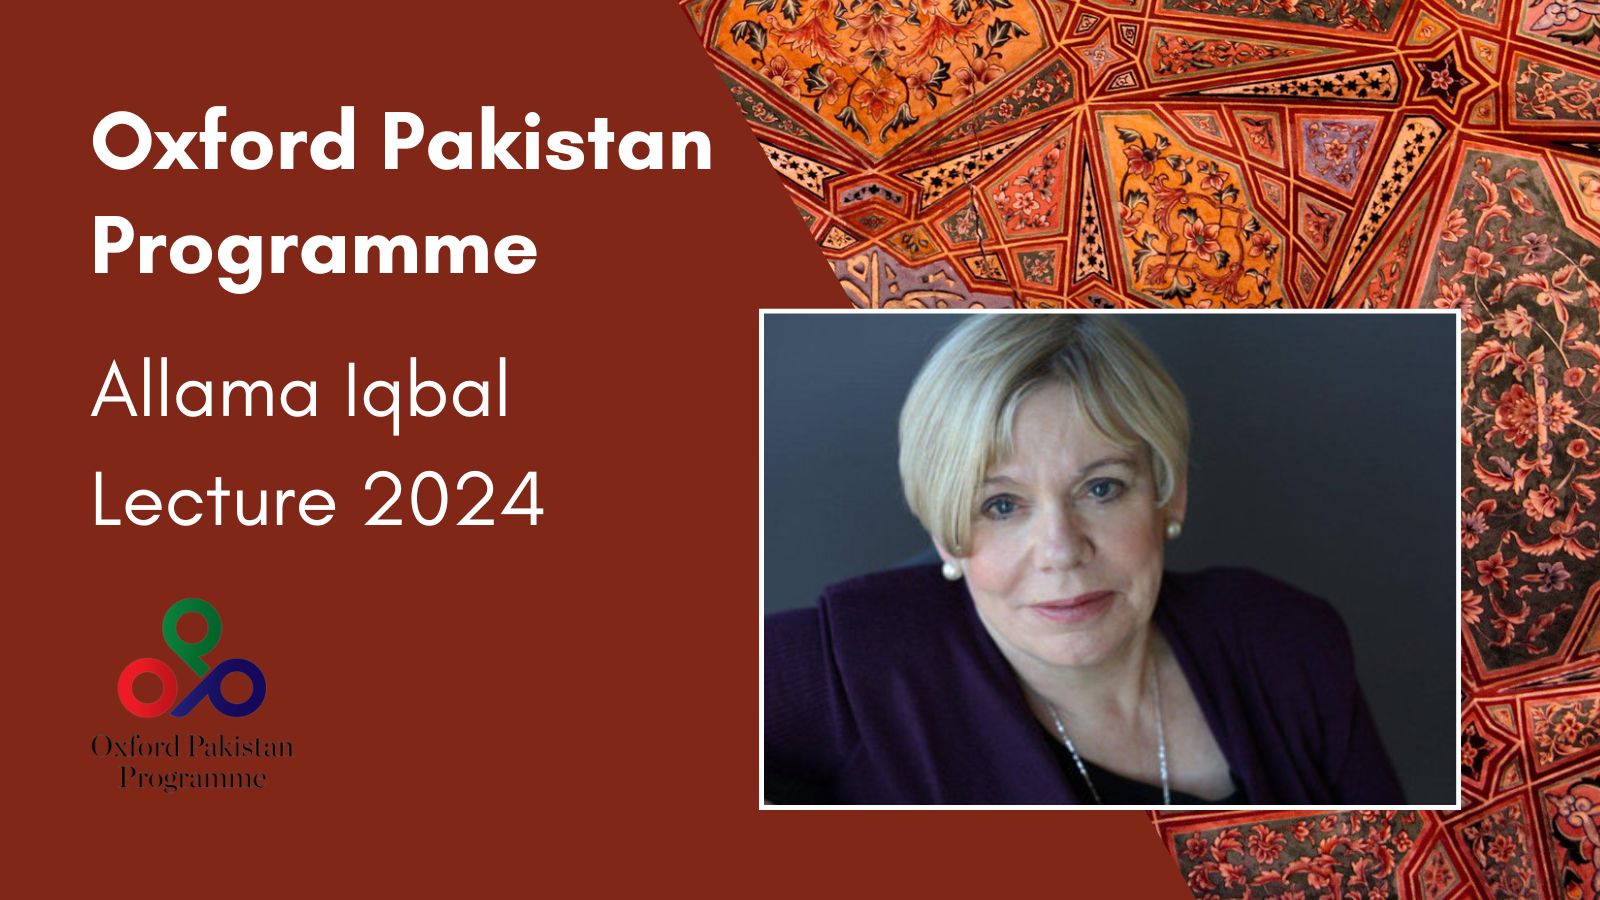 Photo of Karen Armstrong, who has short blonde hair, with the text: Oxford Pakistan Programme, Allama Iqbal Lecture 2024